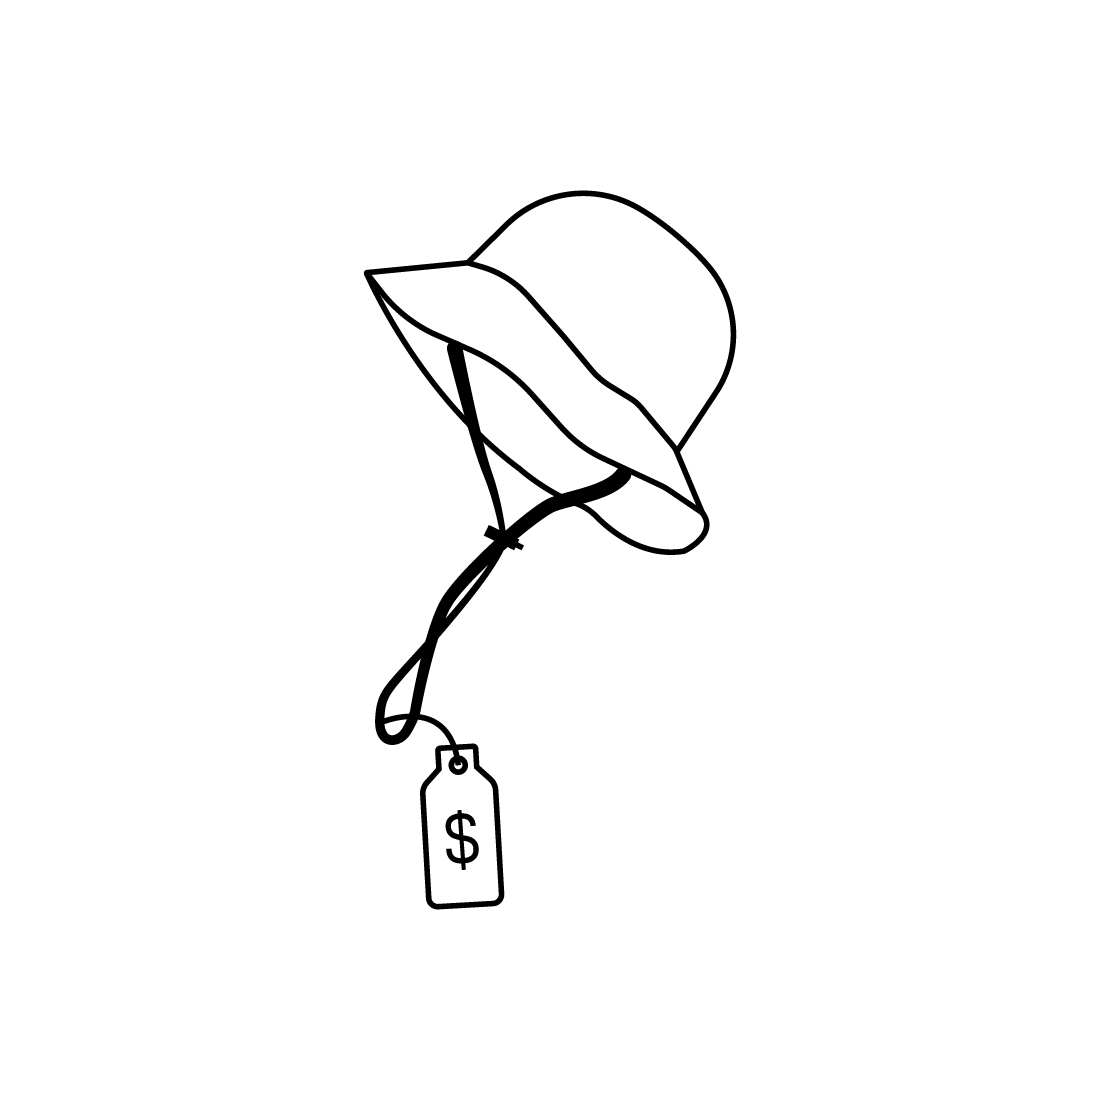 Black and white drawing of a hat on a string.